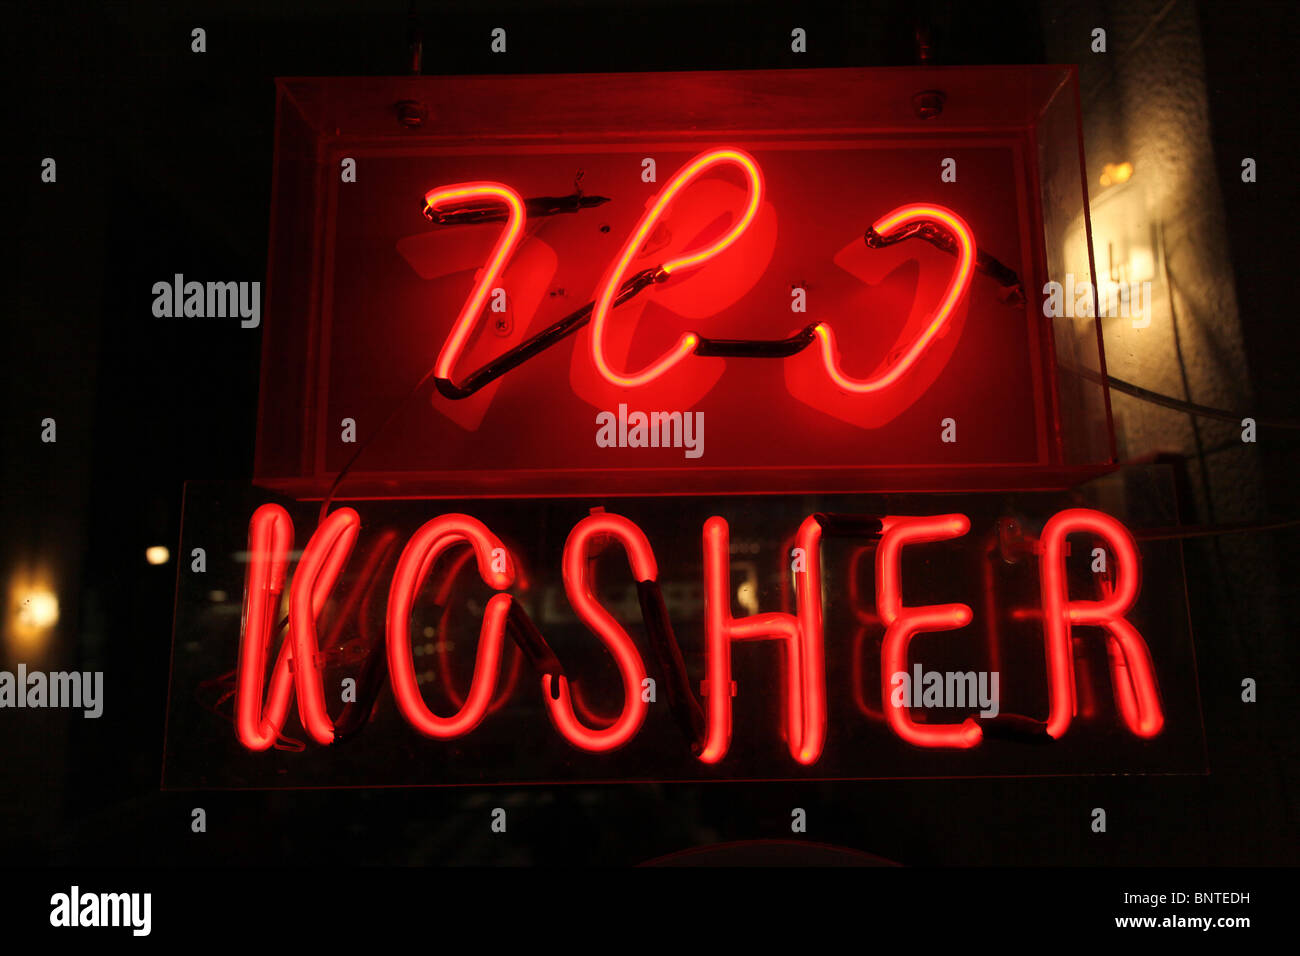 The Hebrew word Kosher in Hebrew and English at the entrance to a restaurant, indicates that the foods offered conform to the Jewish dietary regulations of kashrut (dietary law), Israel Stock Photo